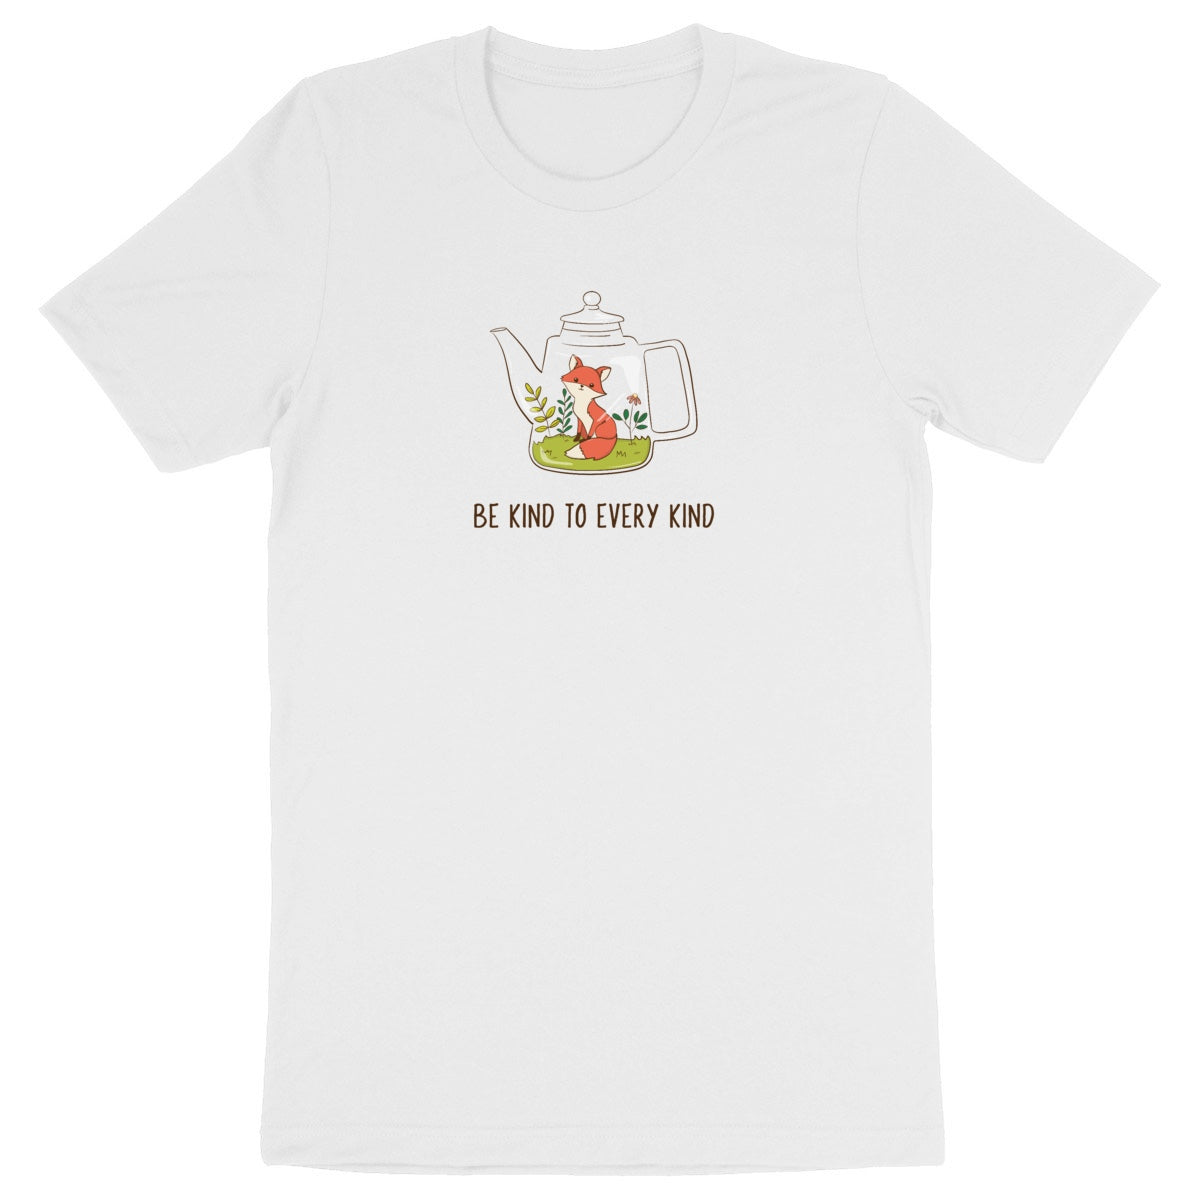 Be kind to every kind - Unisex Organic T-shirt